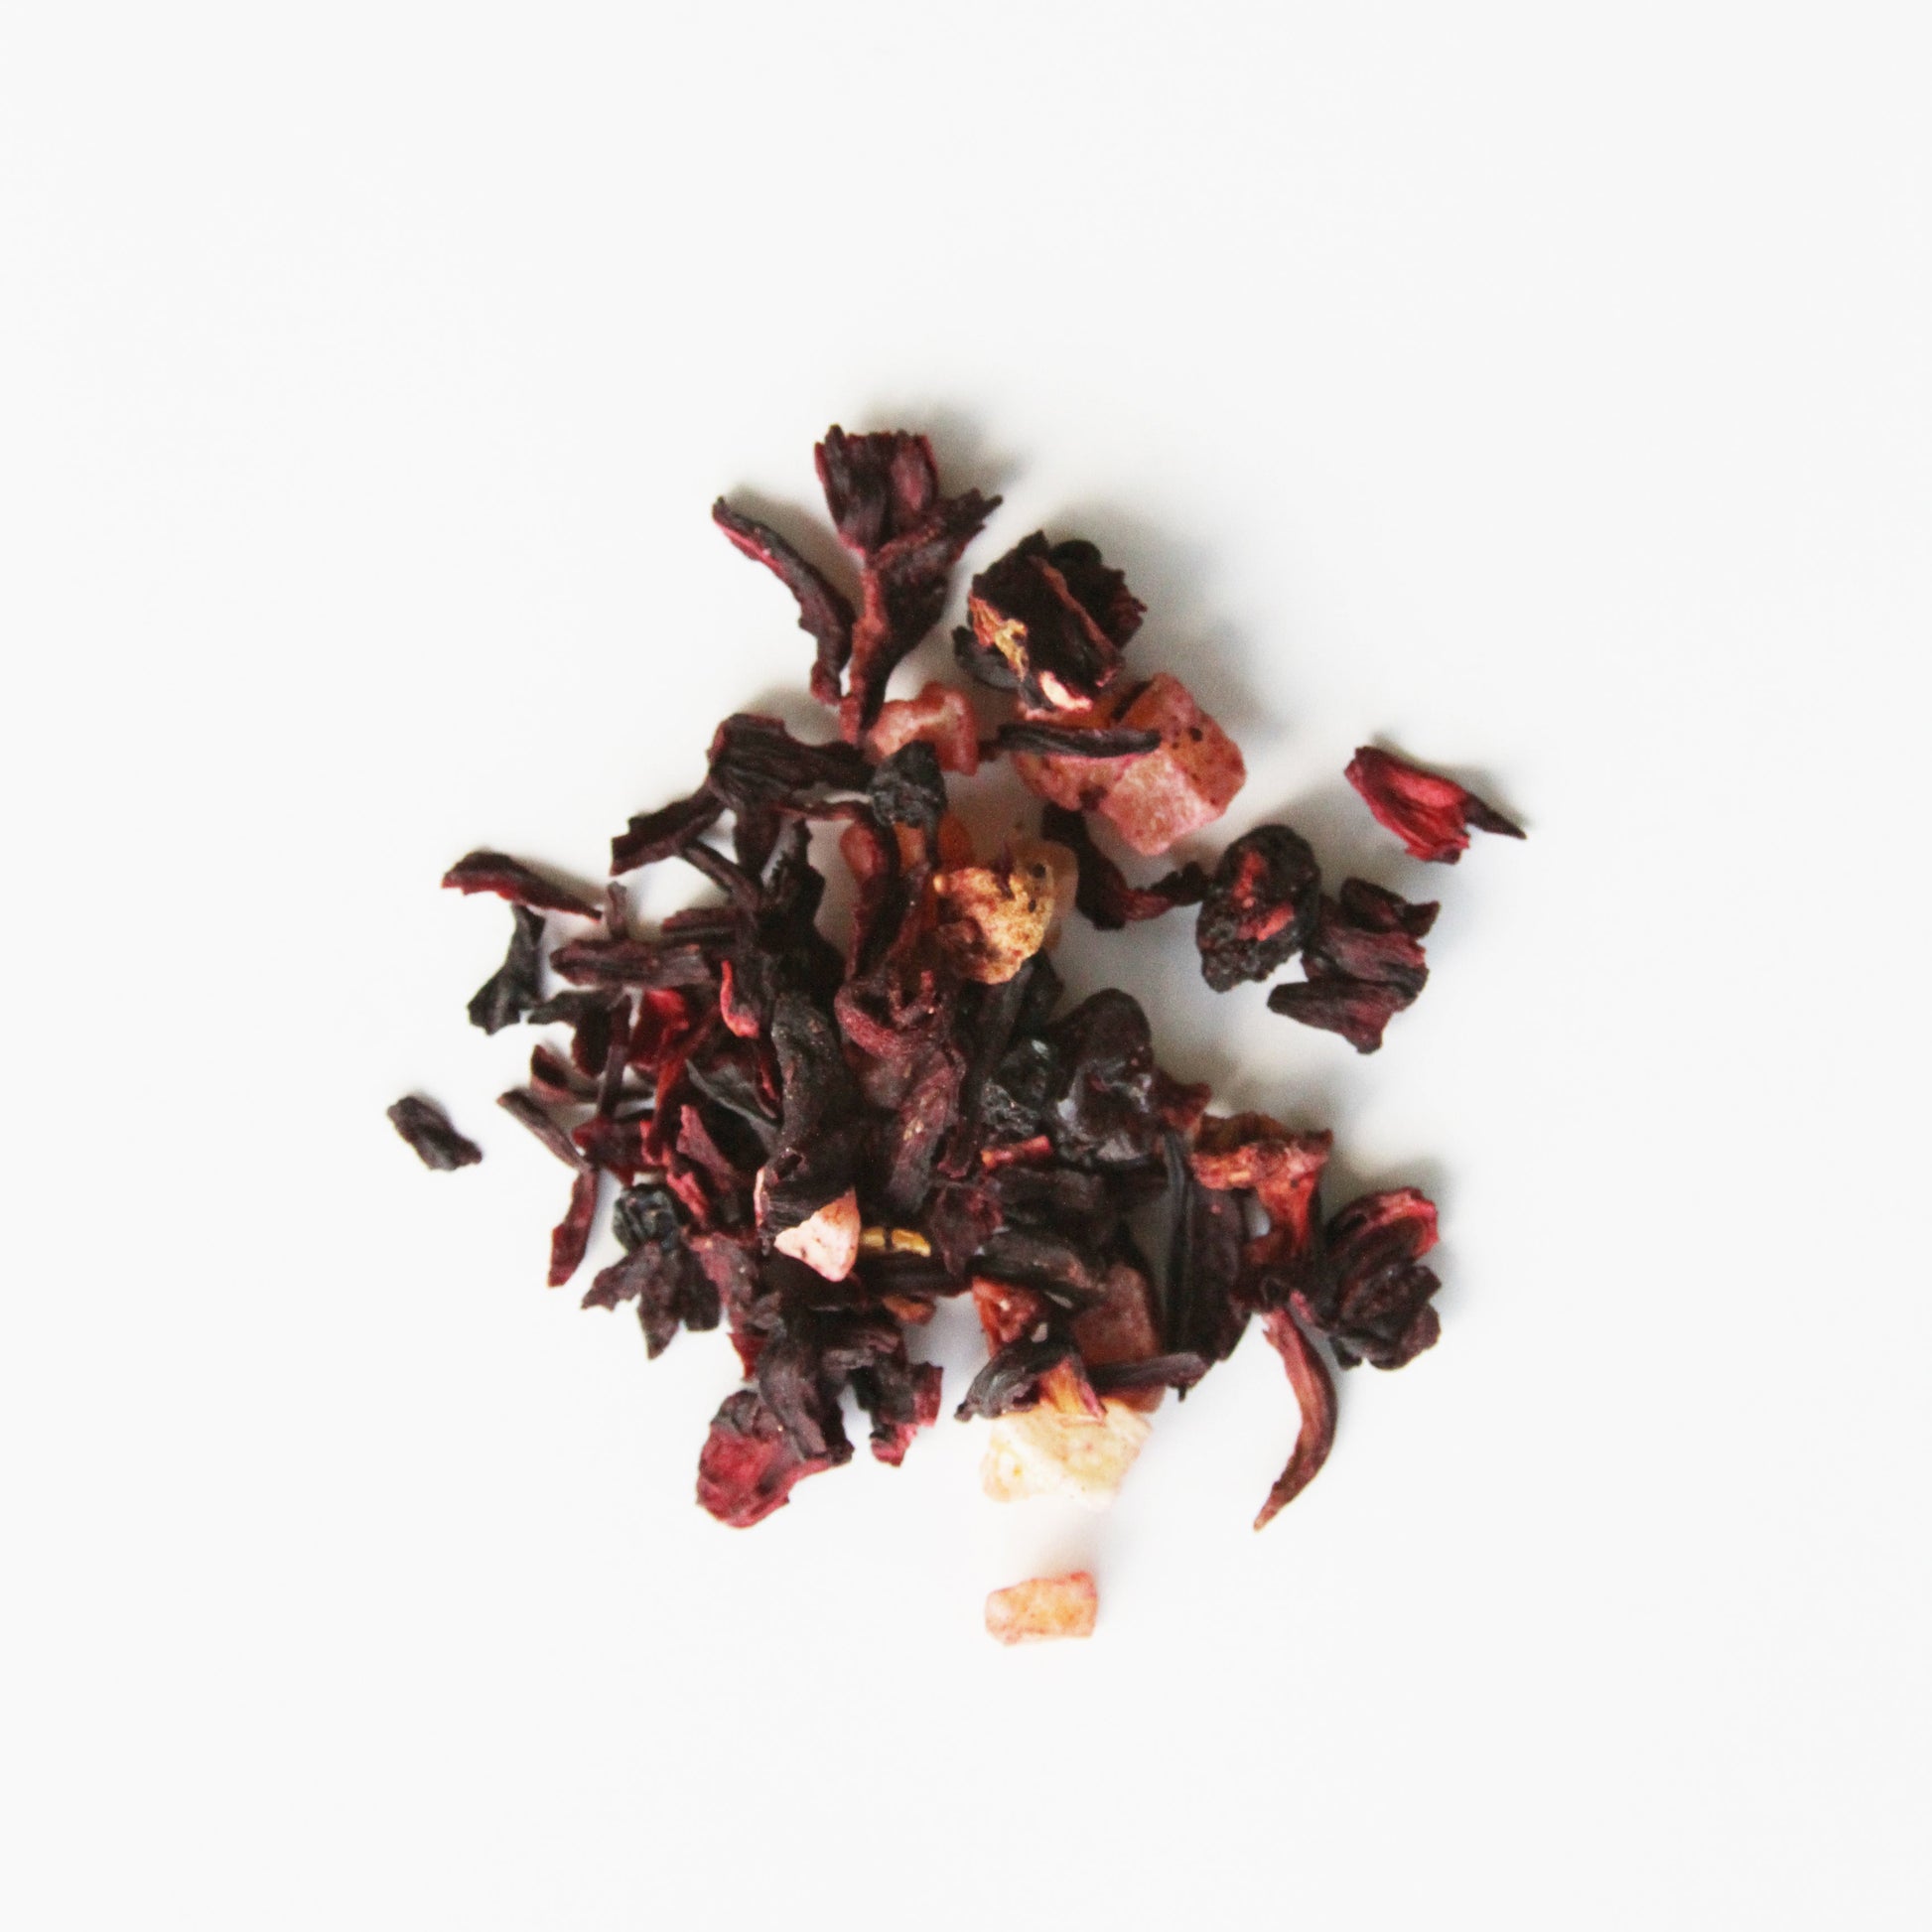 Loose Royal Fruits Blend, pieces of dried fruits, flowers, and flavorings